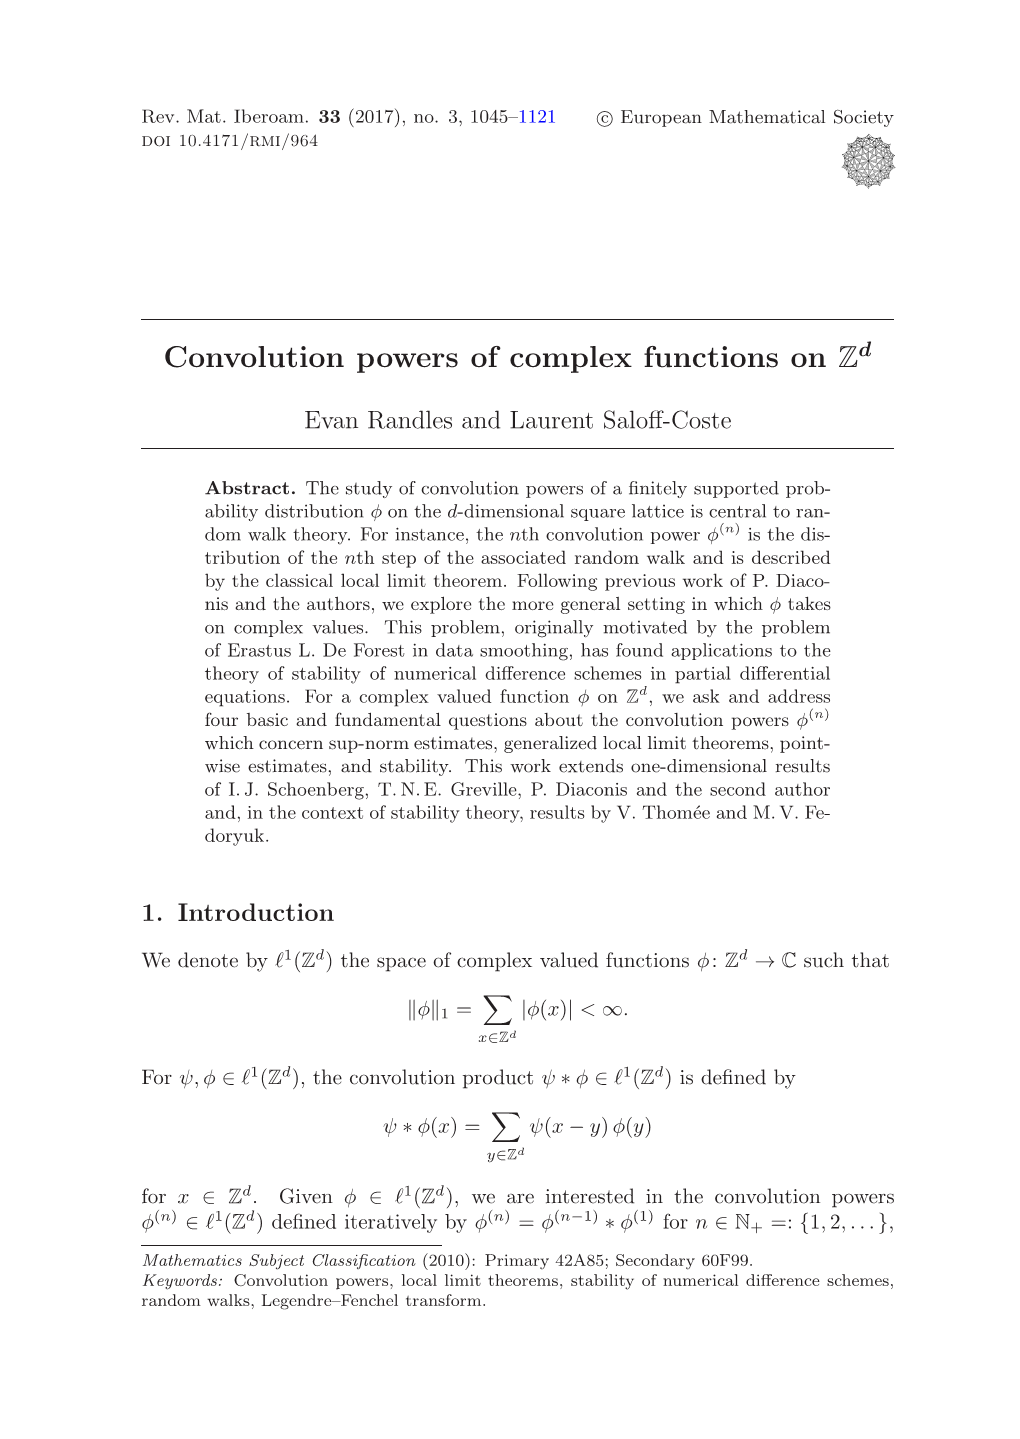 Convolution Powers of Complex Functions on Zd